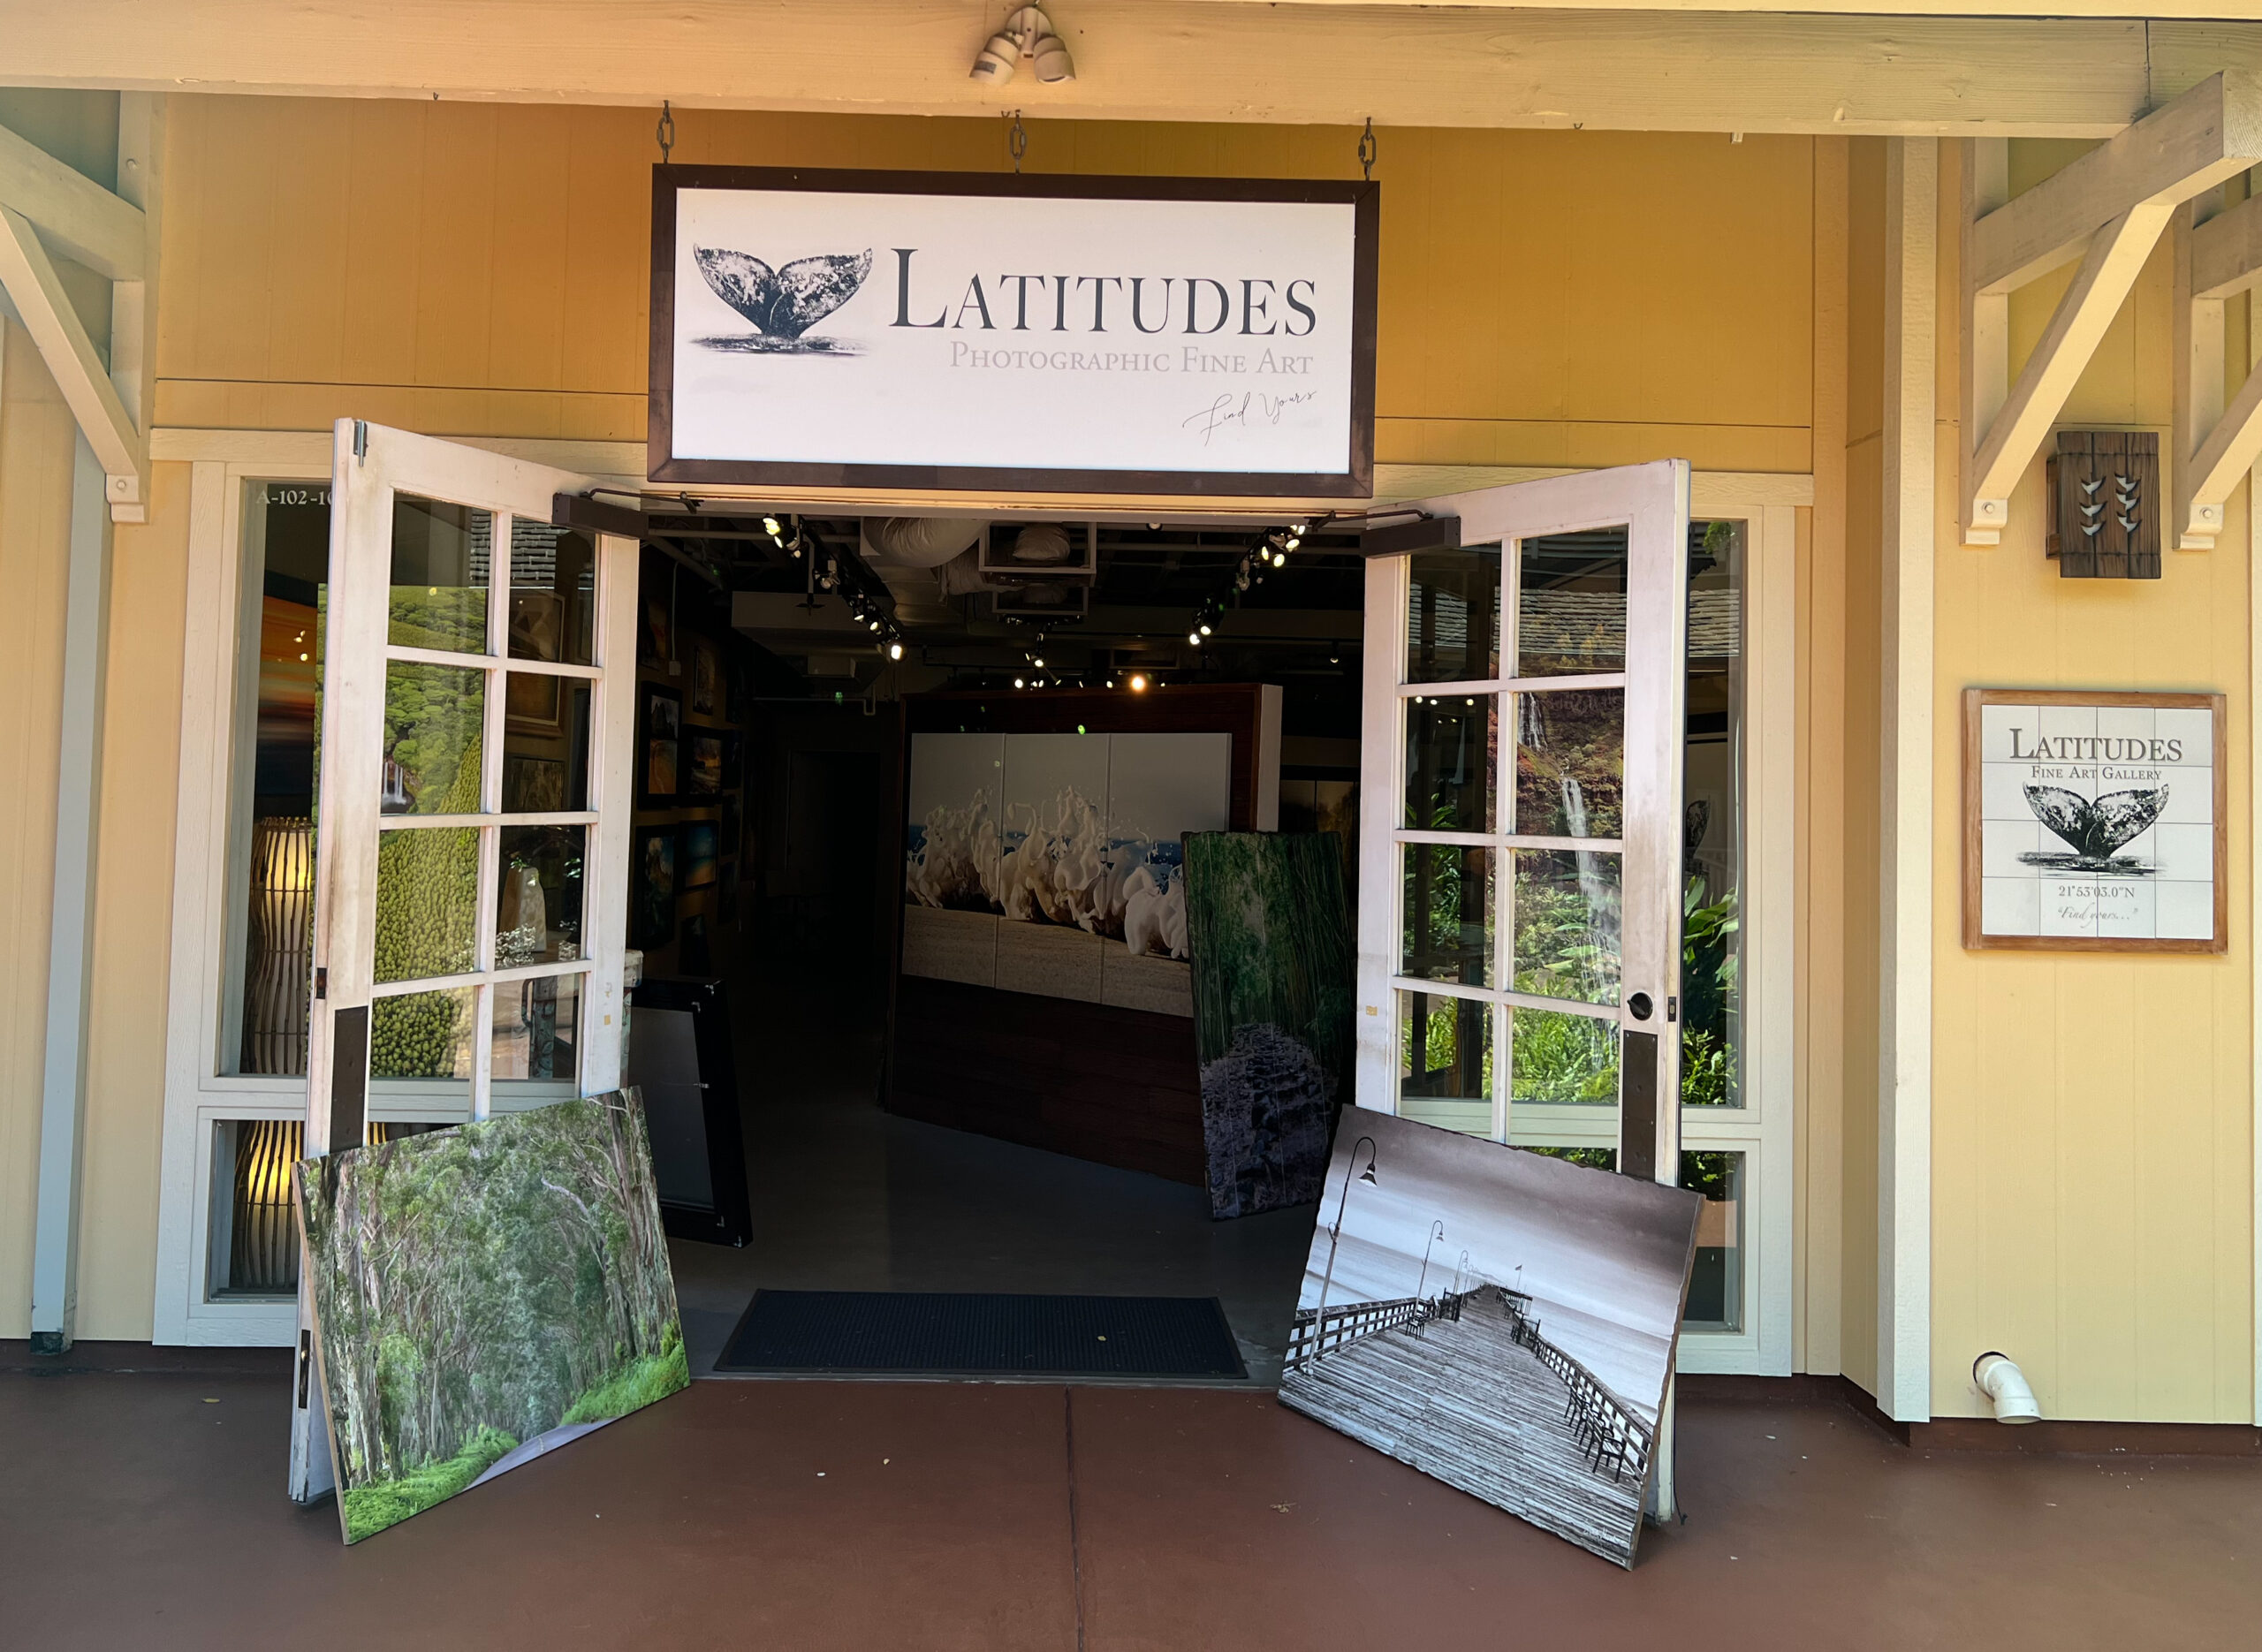 Photographic Art That Will Blow Your Mind – Latitudes Gallery in Poipu on the Island of Kauai